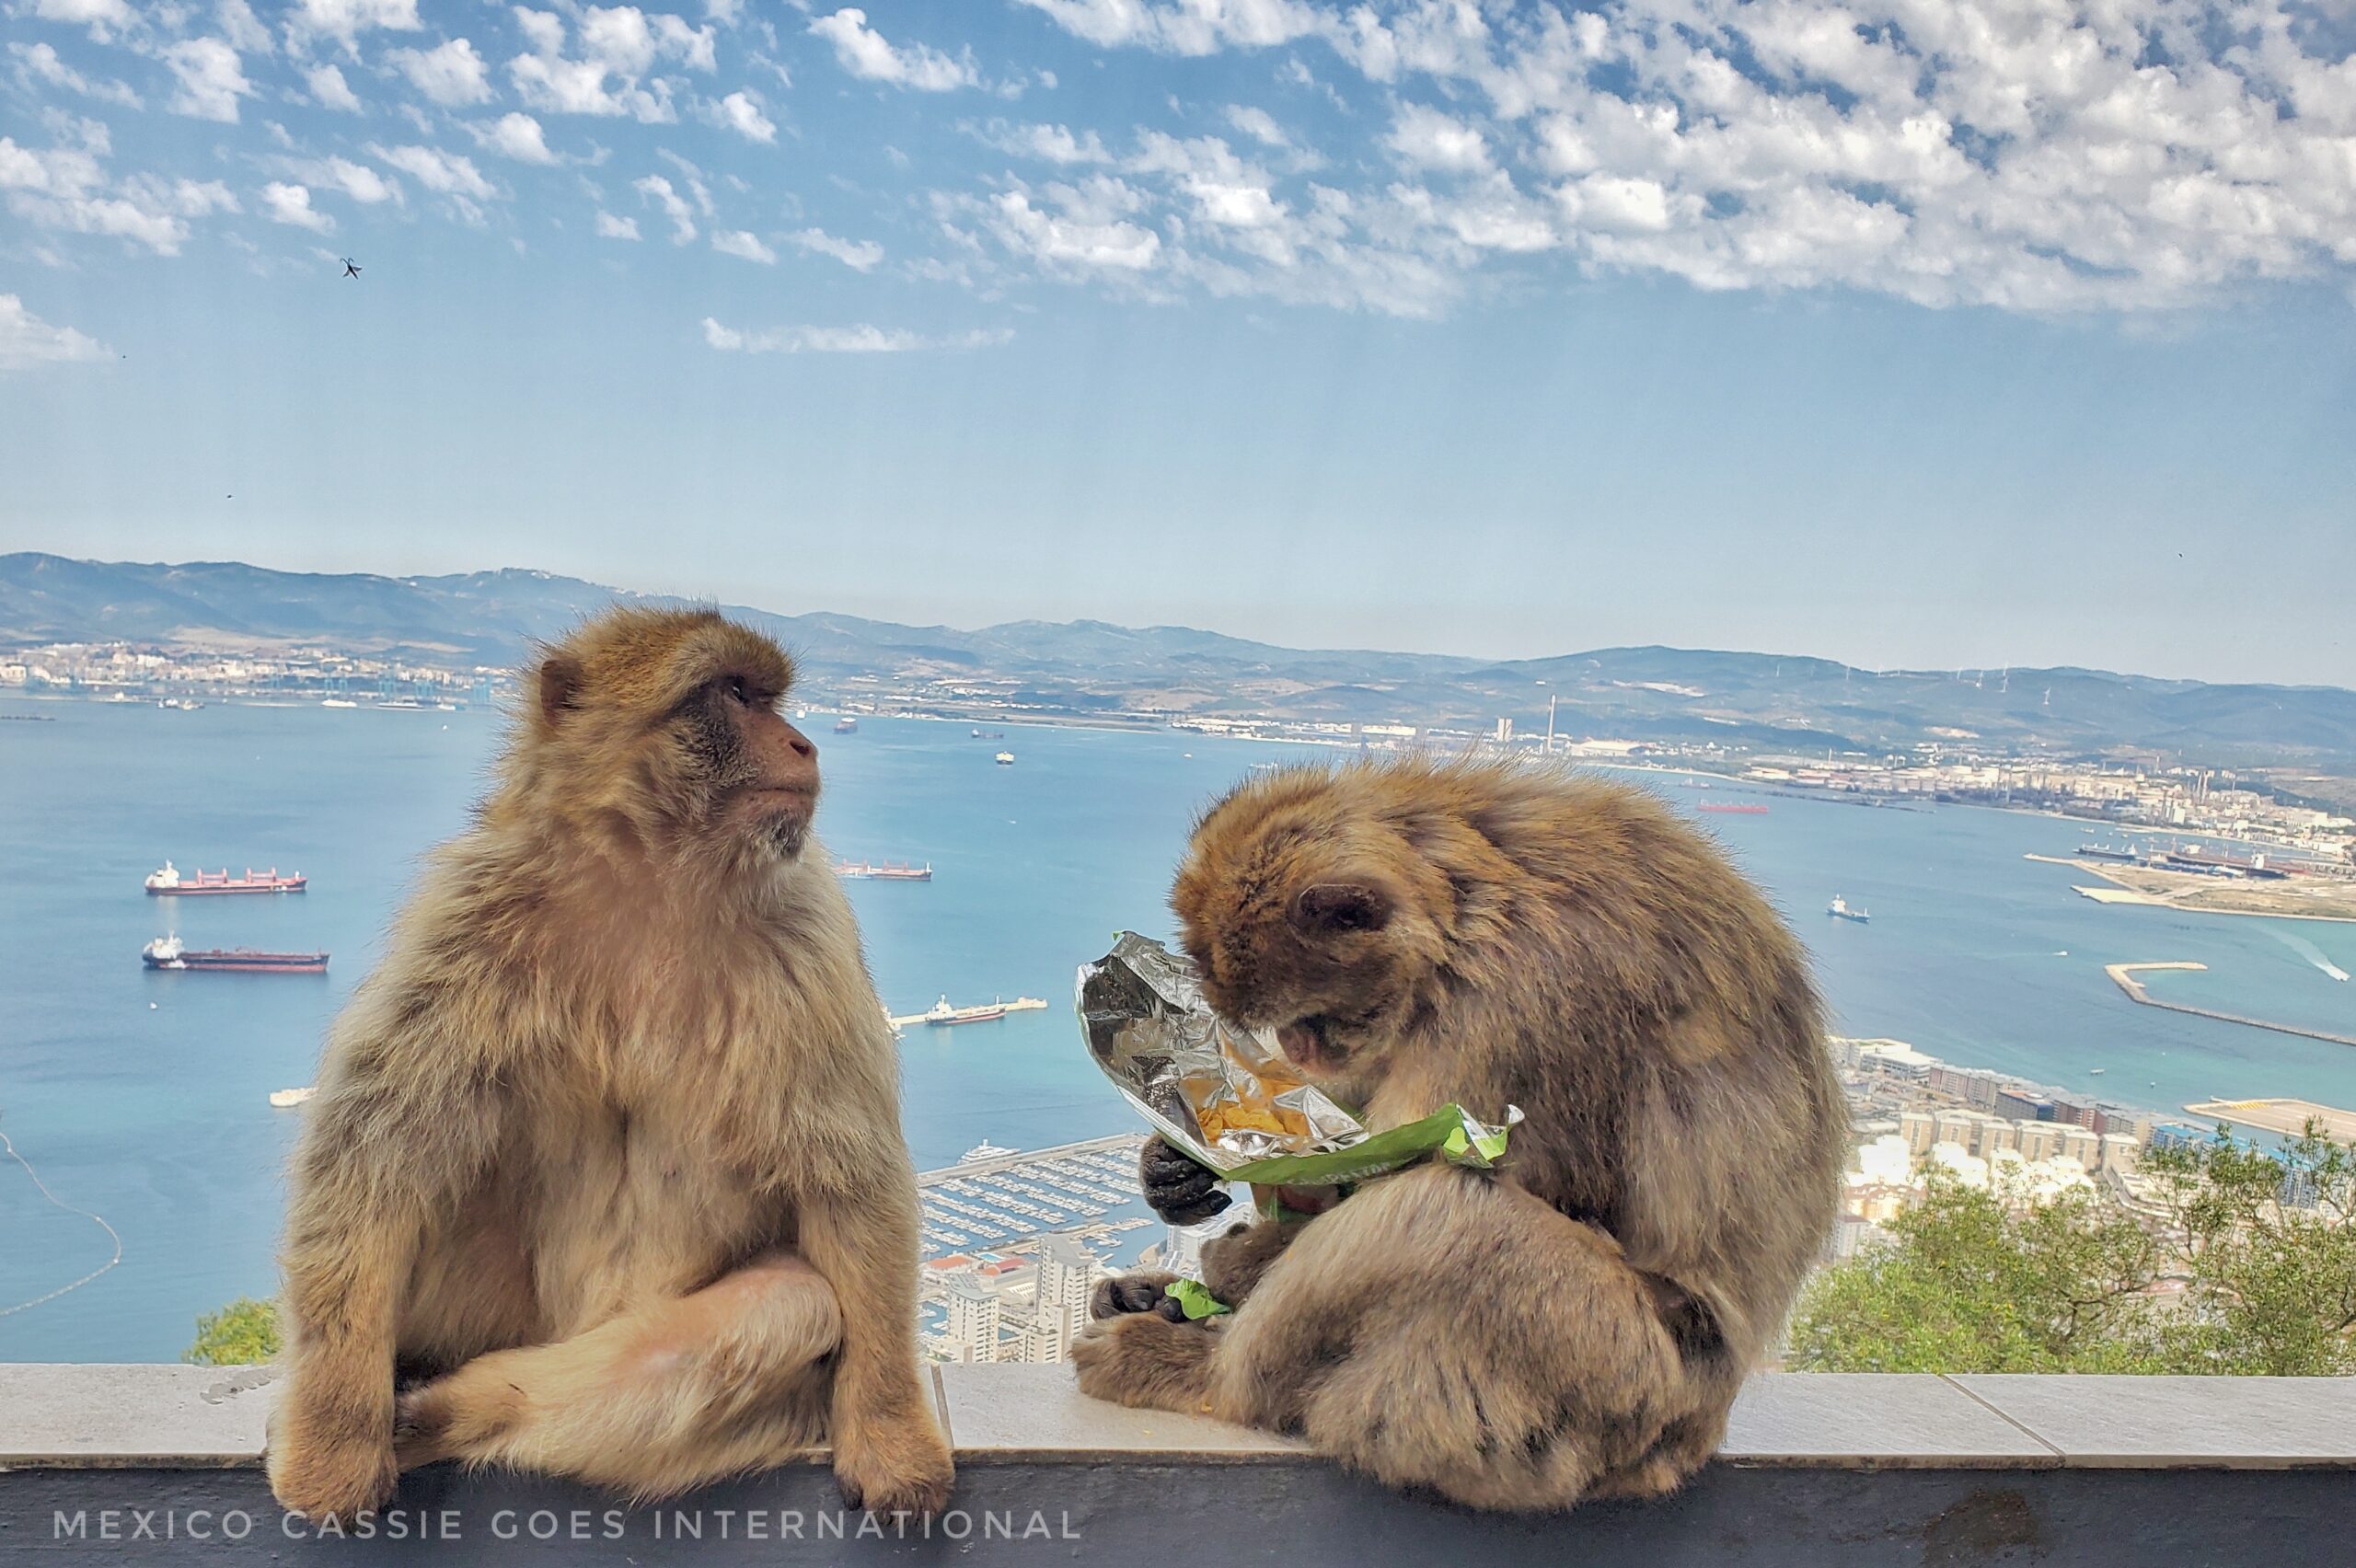 two barbary apes sitting on wall in front of ocean view. one ape has face in a bag of crisps